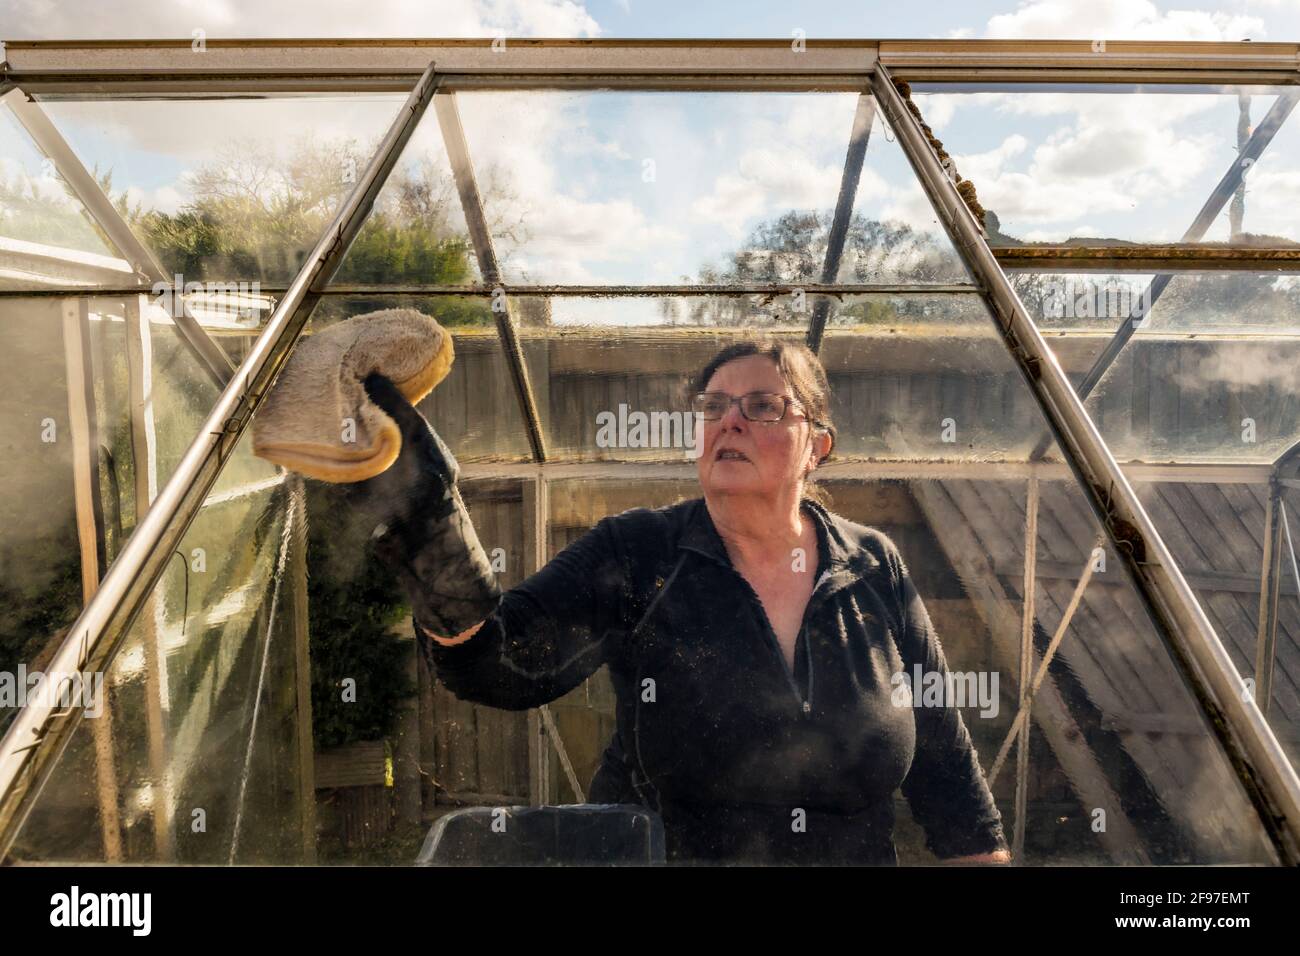 Woman renovating an old greenhouse.  Washing, cleaning & disinfecting the glass to remove algae before the start of a new growing season. Stock Photo